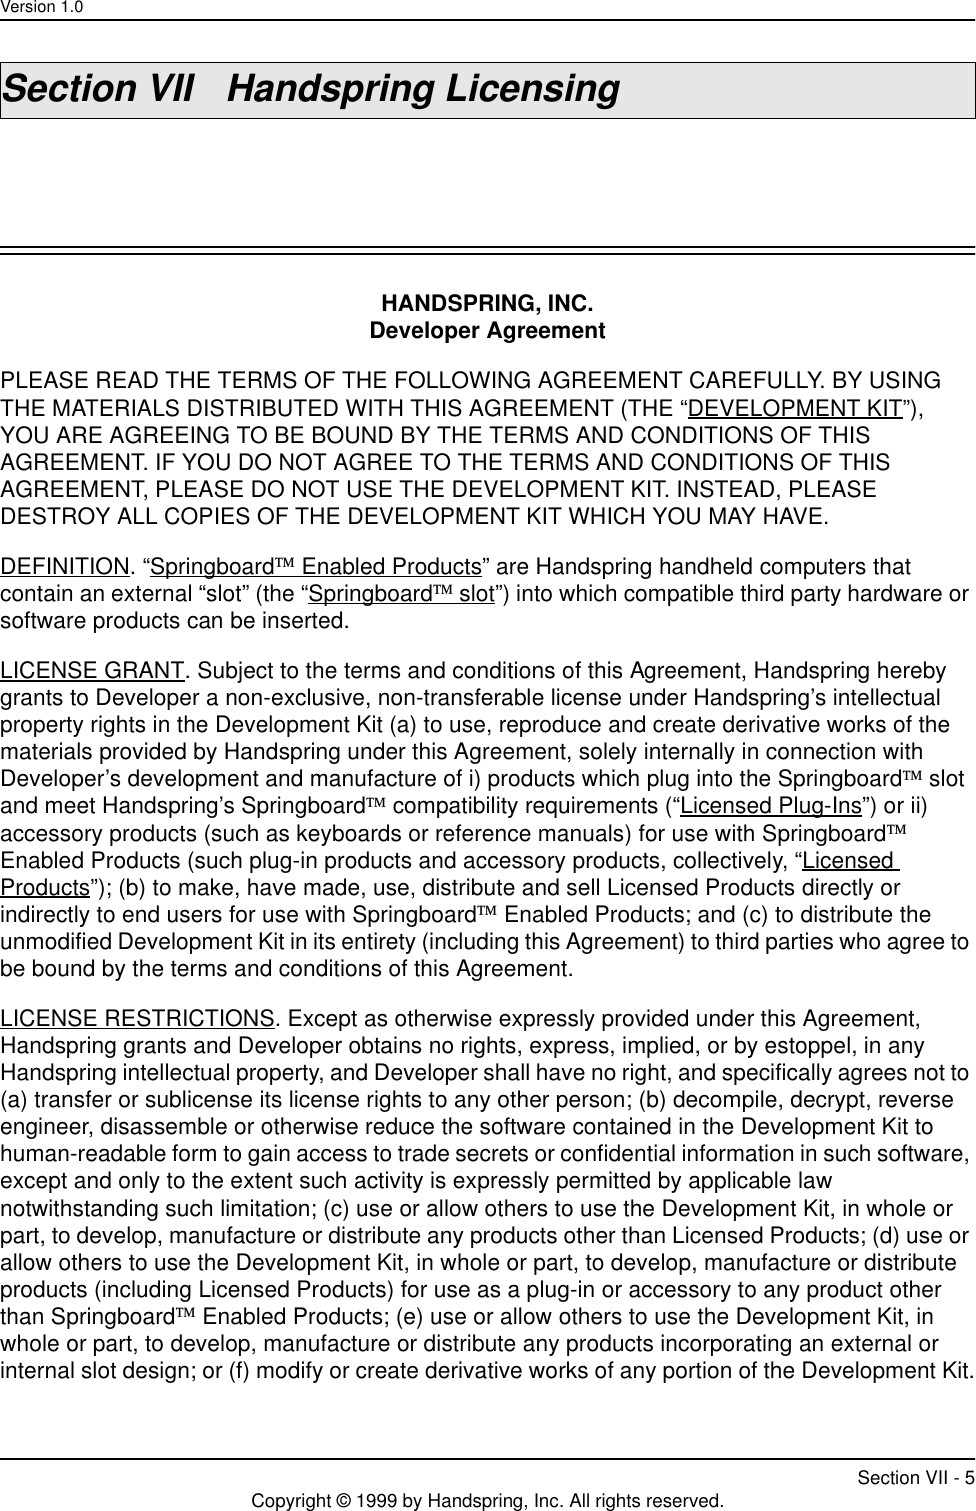 Version 1.0Section VII - 5Copyright © 1999 by Handspring, Inc. All rights reserved.Section VII Handspring LicensingHANDSPRING, INC.Developer AgreementPLEASE READ THE TERMS OF THE FOLLOWING AGREEMENT CAREFULLY. BY USING THE MATERIALS DISTRIBUTED WITH THIS AGREEMENT (THE “DEVELOPMENT KIT”), YOU ARE AGREEING TO BE BOUND BY THE TERMS AND CONDITIONS OF THIS AGREEMENT. IF YOU DO NOT AGREE TO THE TERMS AND CONDITIONS OF THIS AGREEMENT, PLEASE DO NOT USE THE DEVELOPMENT KIT. INSTEAD, PLEASE DESTROY ALL COPIES OF THE DEVELOPMENT KIT WHICH YOU MAY HAVE.DEFINITION. “Springboard Enabled Products” are Handspring handheld computers that contain an external “slot” (the “Springboard slot”) into which compatible third party hardware or software products can be inserted.LICENSE GRANT. Subject to the terms and conditions of this Agreement, Handspring hereby grants to Developer a non-exclusive, non-transferable license under Handspring’s intellectual property rights in the Development Kit (a) to use, reproduce and create derivative works of the materials provided by Handspring under this Agreement, solely internally in connection with Developer’s development and manufacture of i) products which plug into the Springboard slot and meet Handspring’s Springboard compatibility requirements (“Licensed Plug-Ins”) or ii) accessory products (such as keyboards or reference manuals) for use with Springboard Enabled Products (such plug-in products and accessory products, collectively, “Licensed Products”); (b) to make, have made, use, distribute and sell Licensed Products directly or indirectly to end users for use with Springboard Enabled Products; and (c) to distribute the unmodified Development Kit in its entirety (including this Agreement) to third parties who agree to be bound by the terms and conditions of this Agreement.LICENSE RESTRICTIONS. Except as otherwise expressly provided under this Agreement, Handspring grants and Developer obtains no rights, express, implied, or by estoppel, in any Handspring intellectual property, and Developer shall have no right, and specifically agrees not to (a) transfer or sublicense its license rights to any other person; (b) decompile, decrypt, reverse engineer, disassemble or otherwise reduce the software contained in the Development Kit to human-readable form to gain access to trade secrets or confidential information in such software, except and only to the extent such activity is expressly permitted by applicable law notwithstanding such limitation; (c) use or allow others to use the Development Kit, in whole or part, to develop, manufacture or distribute any products other than Licensed Products; (d) use or allow others to use the Development Kit, in whole or part, to develop, manufacture or distribute products (including Licensed Products) for use as a plug-in or accessory to any product other than Springboard Enabled Products; (e) use or allow others to use the Development Kit, in whole or part, to develop, manufacture or distribute any products incorporating an external or internal slot design; or (f) modify or create derivative works of any portion of the Development Kit.